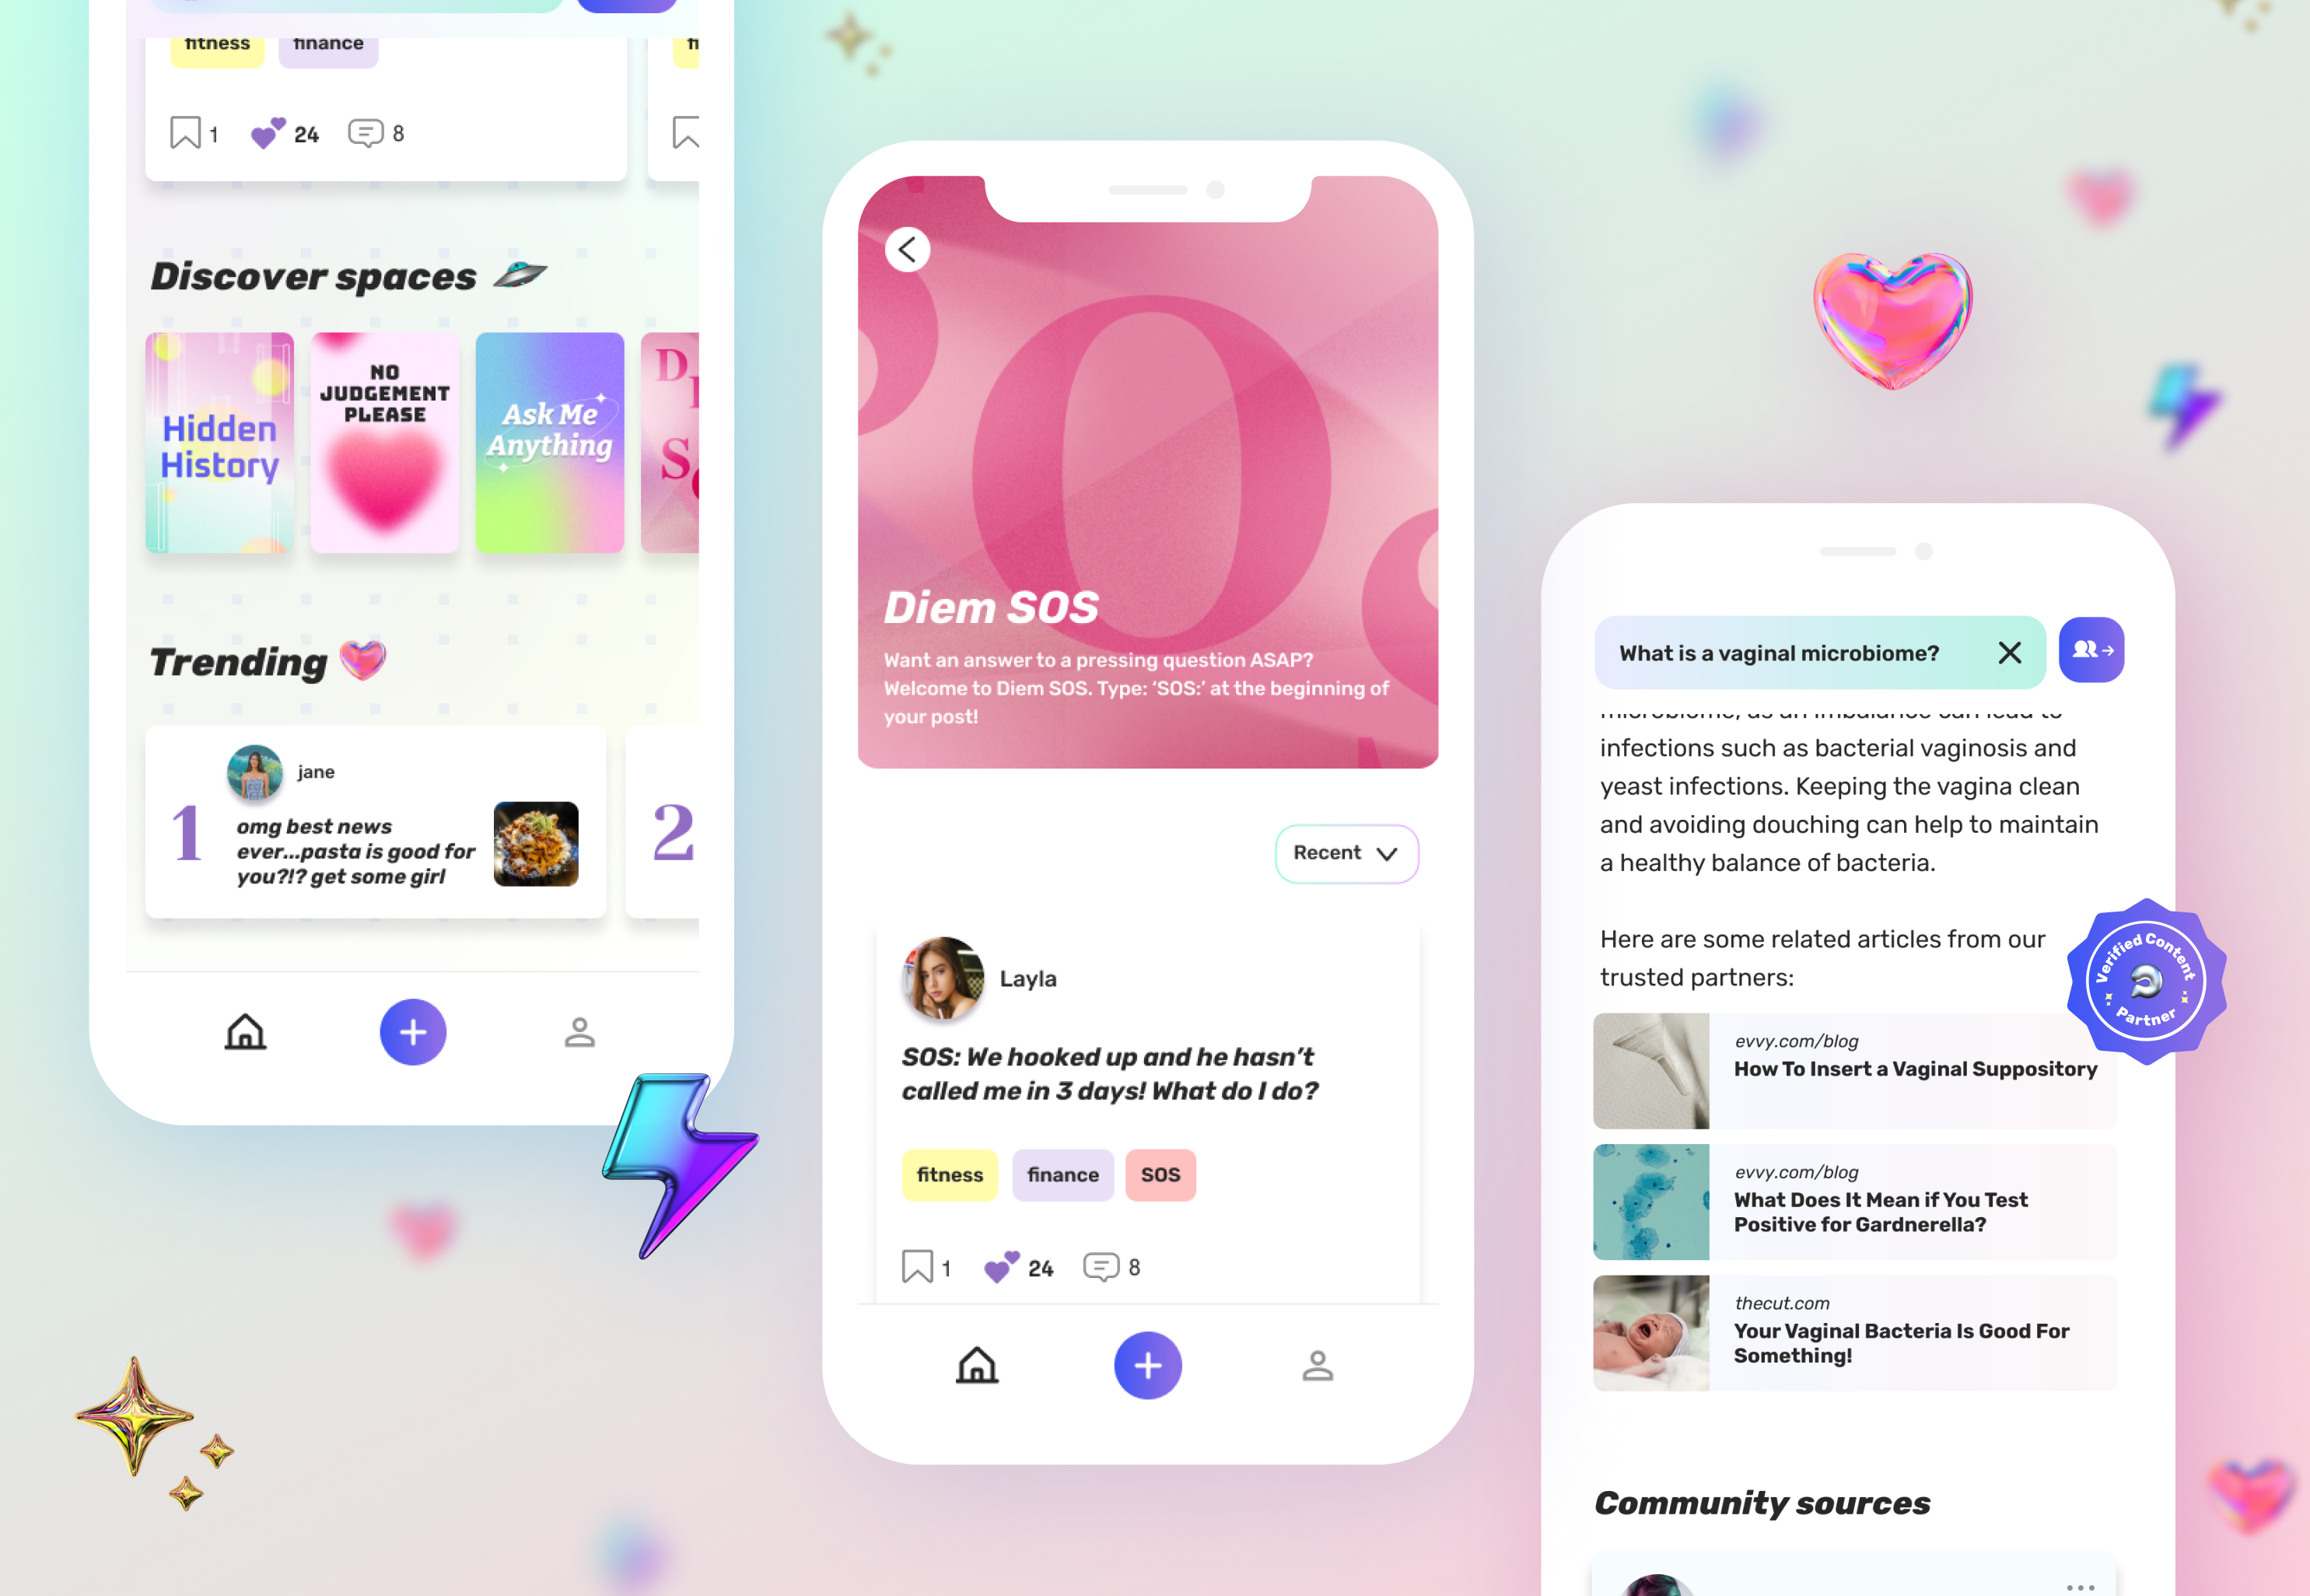 Female-founded startup Diem wants to be the go-to social search engine for women and non-binary folks